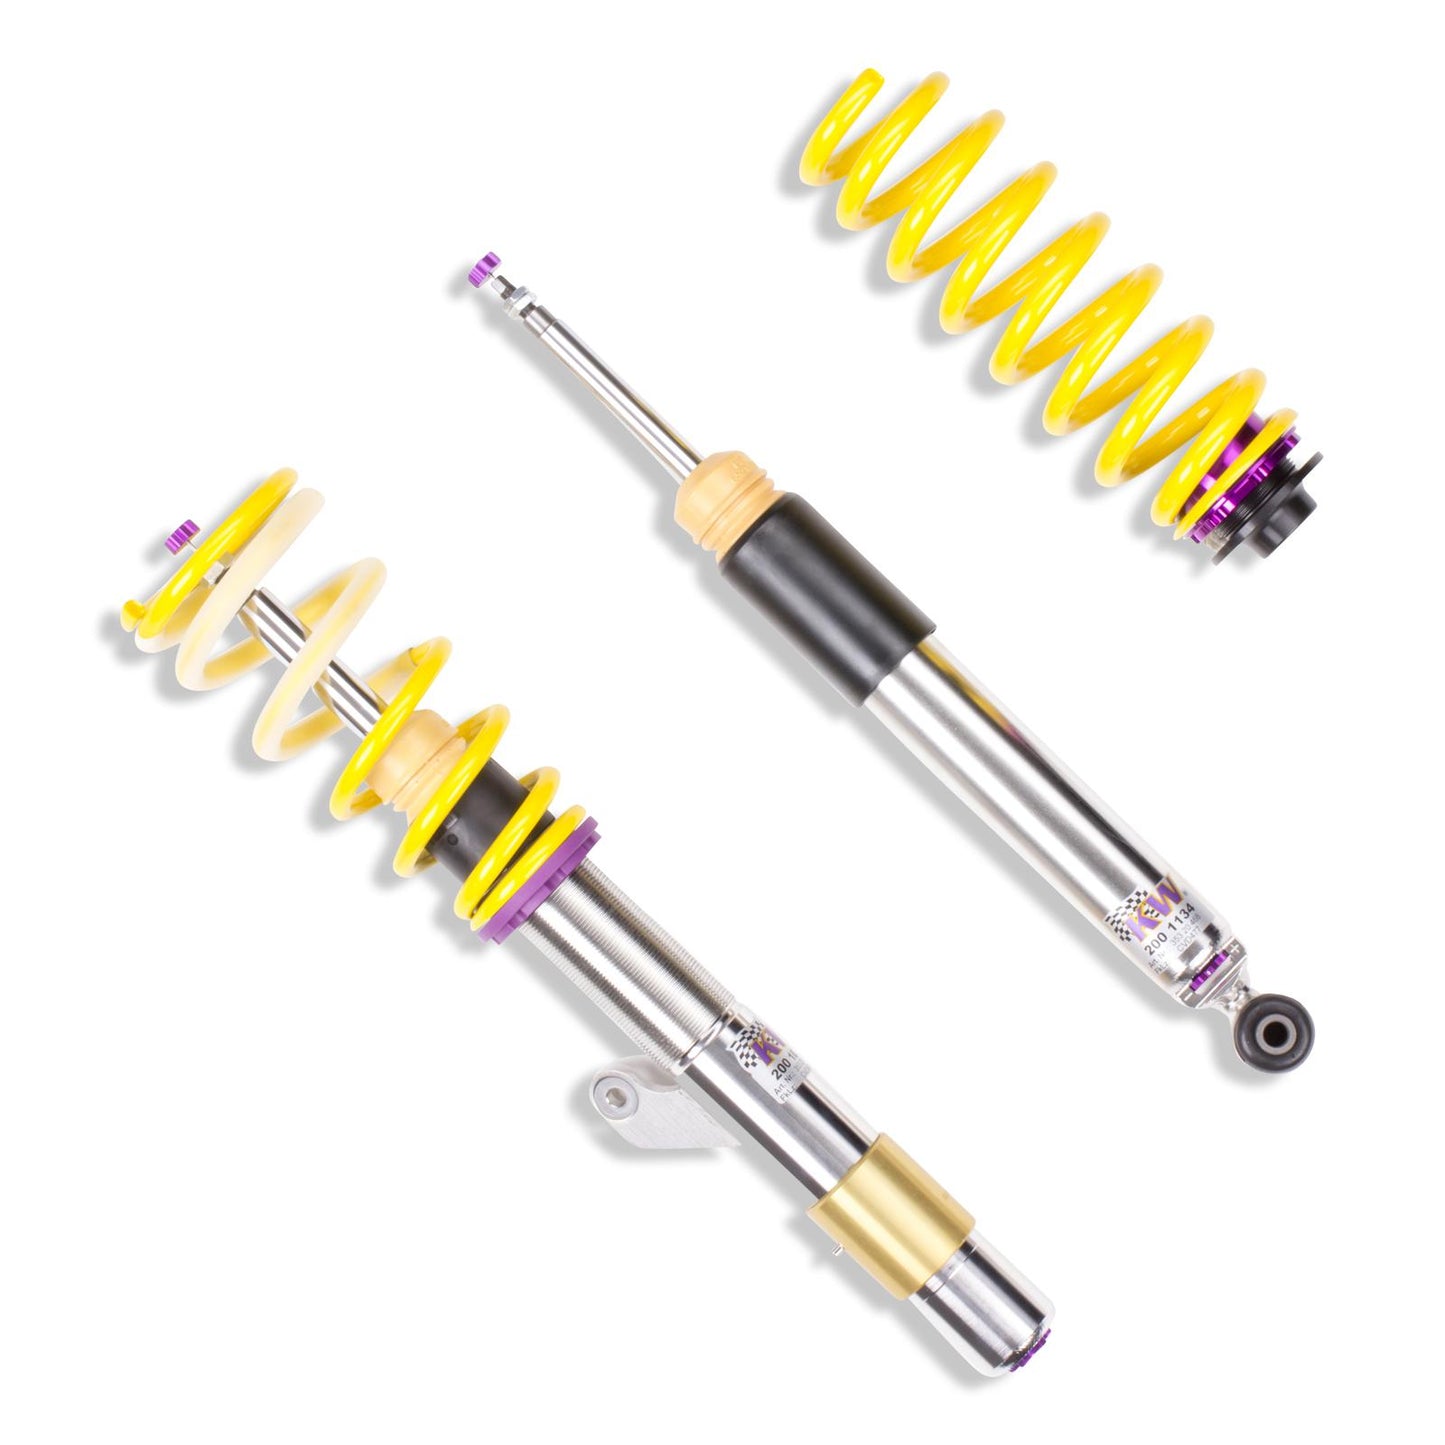 KW V3 Coilovers for BMW 1/2/3/4 Series